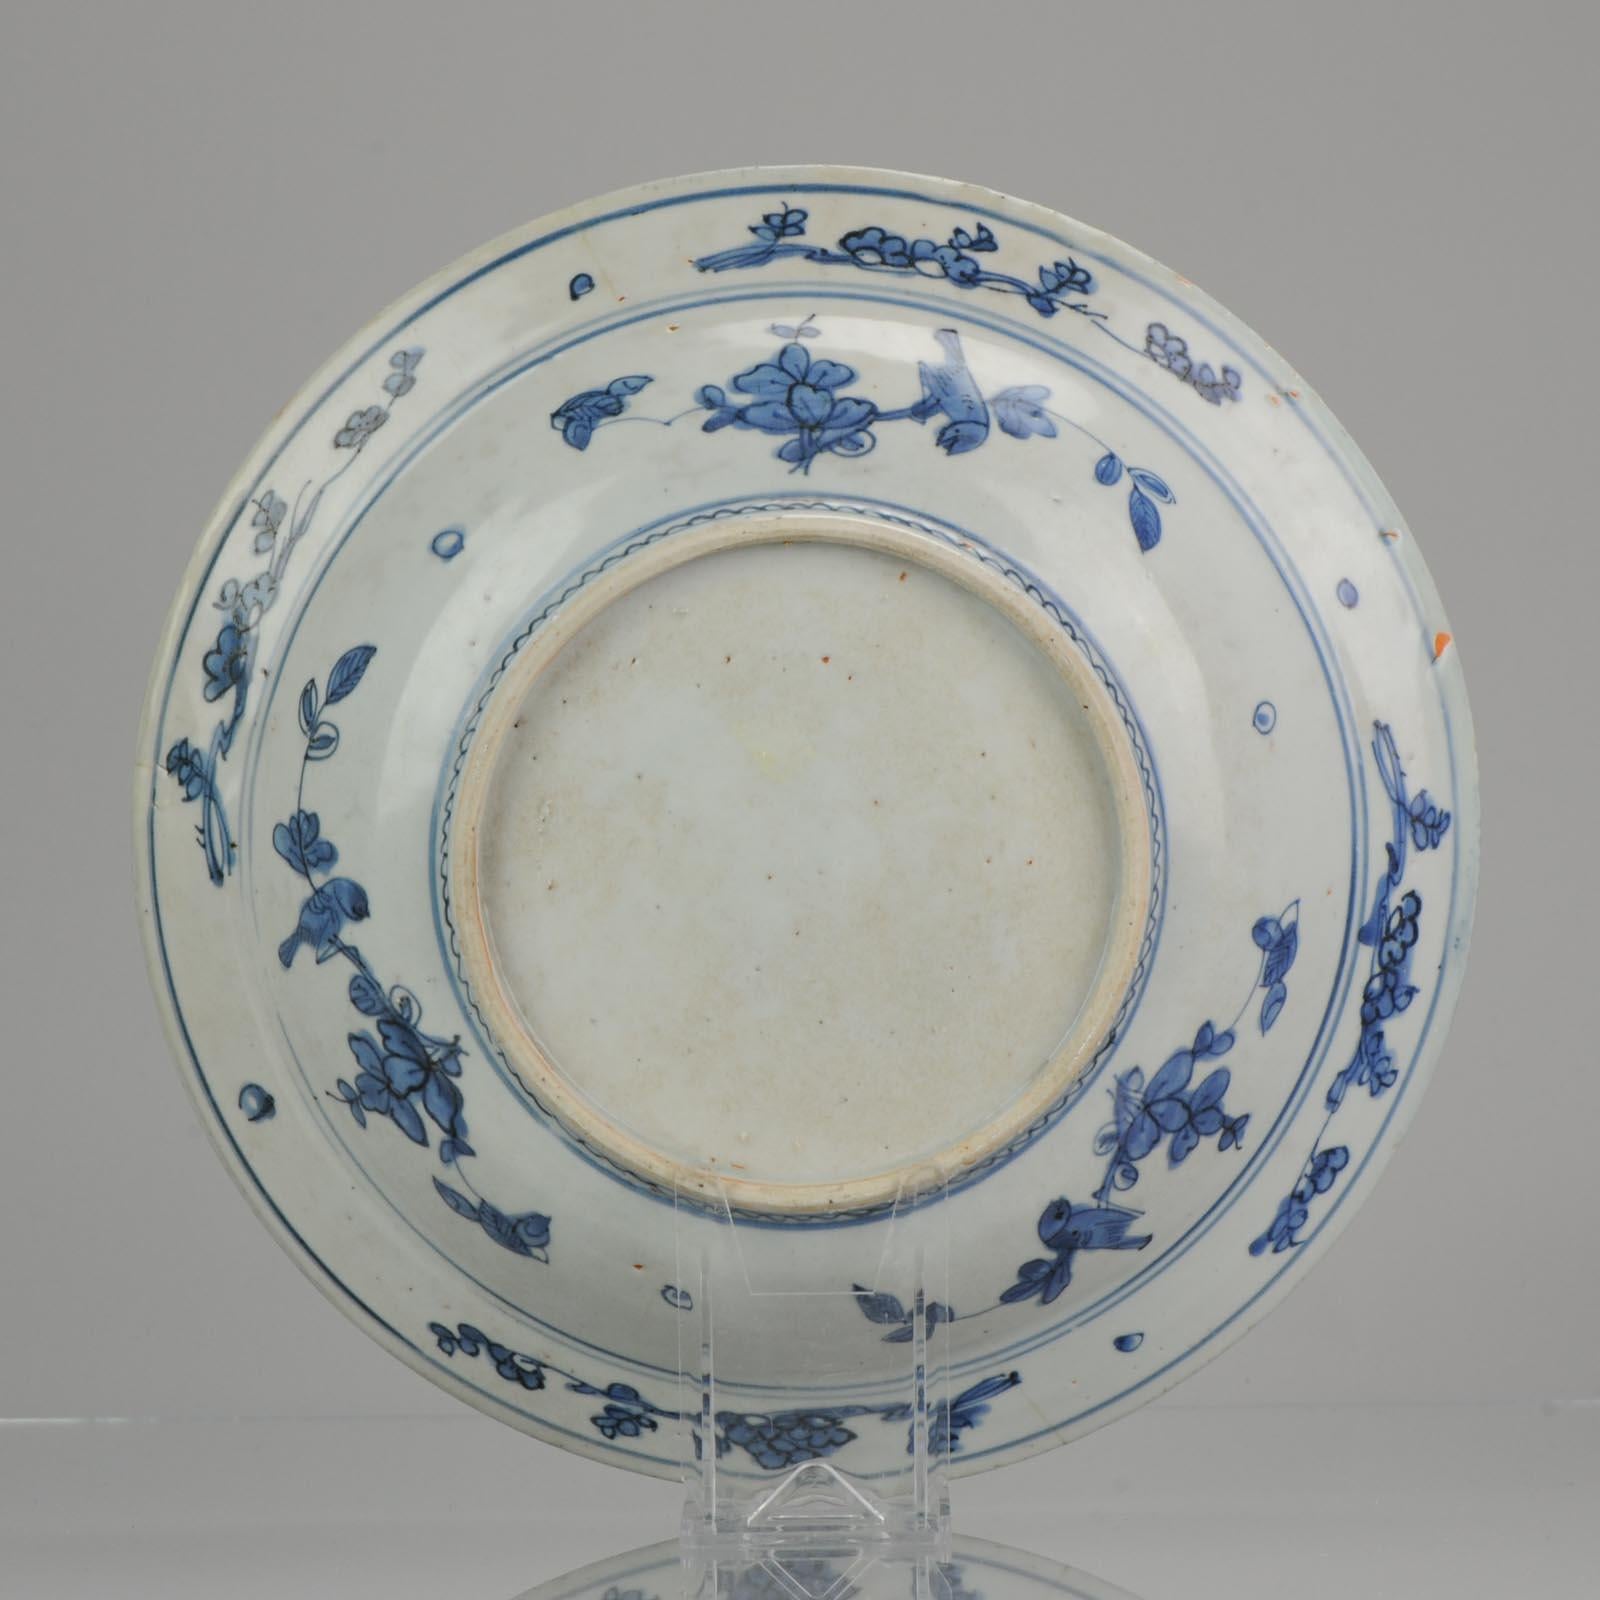 Large and very nice blue and white Charger/dish from the Ming period. Jiajing or Wanli. Absolute rare item.

Dish on footring, decorated in underglaze blue. The dish is decorated with two birds perched beside a peony with flower scrolls to the